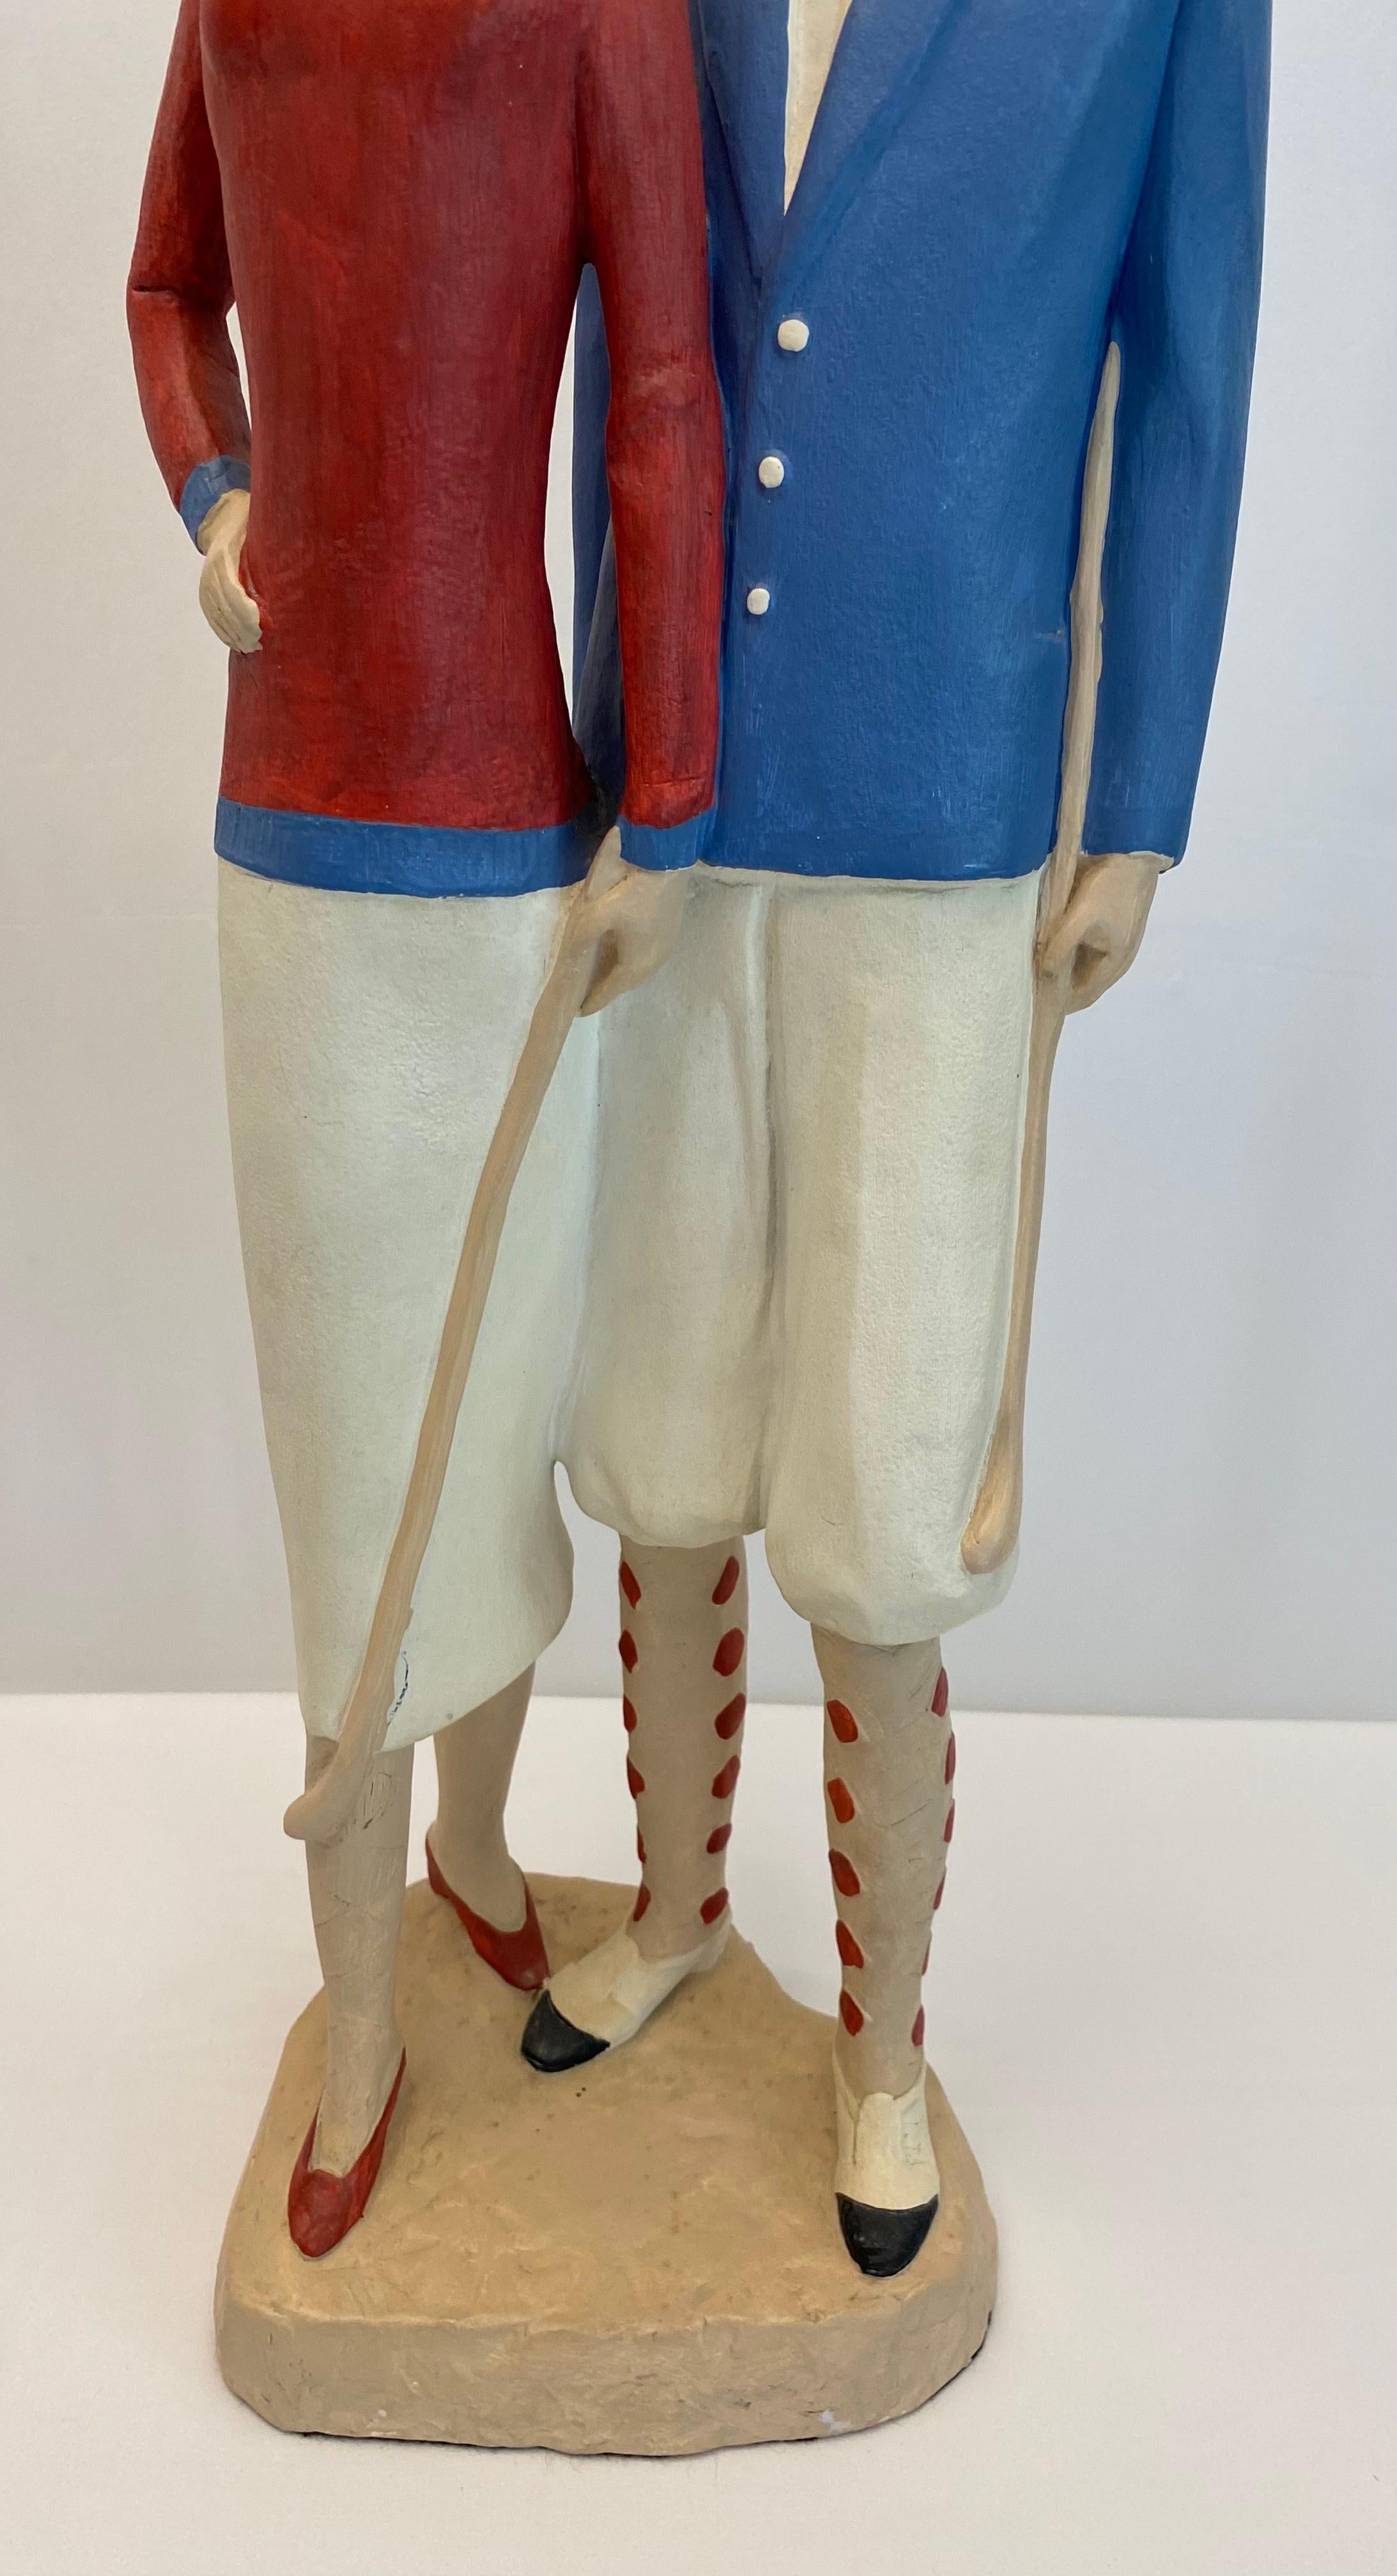 For your consideration is a gorgeous table sculpture of two golfers, dated 1987. 
This Art Deco style decorative sculpture is constructed of plaster and is delightfully heavy. Hand cast and painted. 

Makes a great gift for golf lovers or an